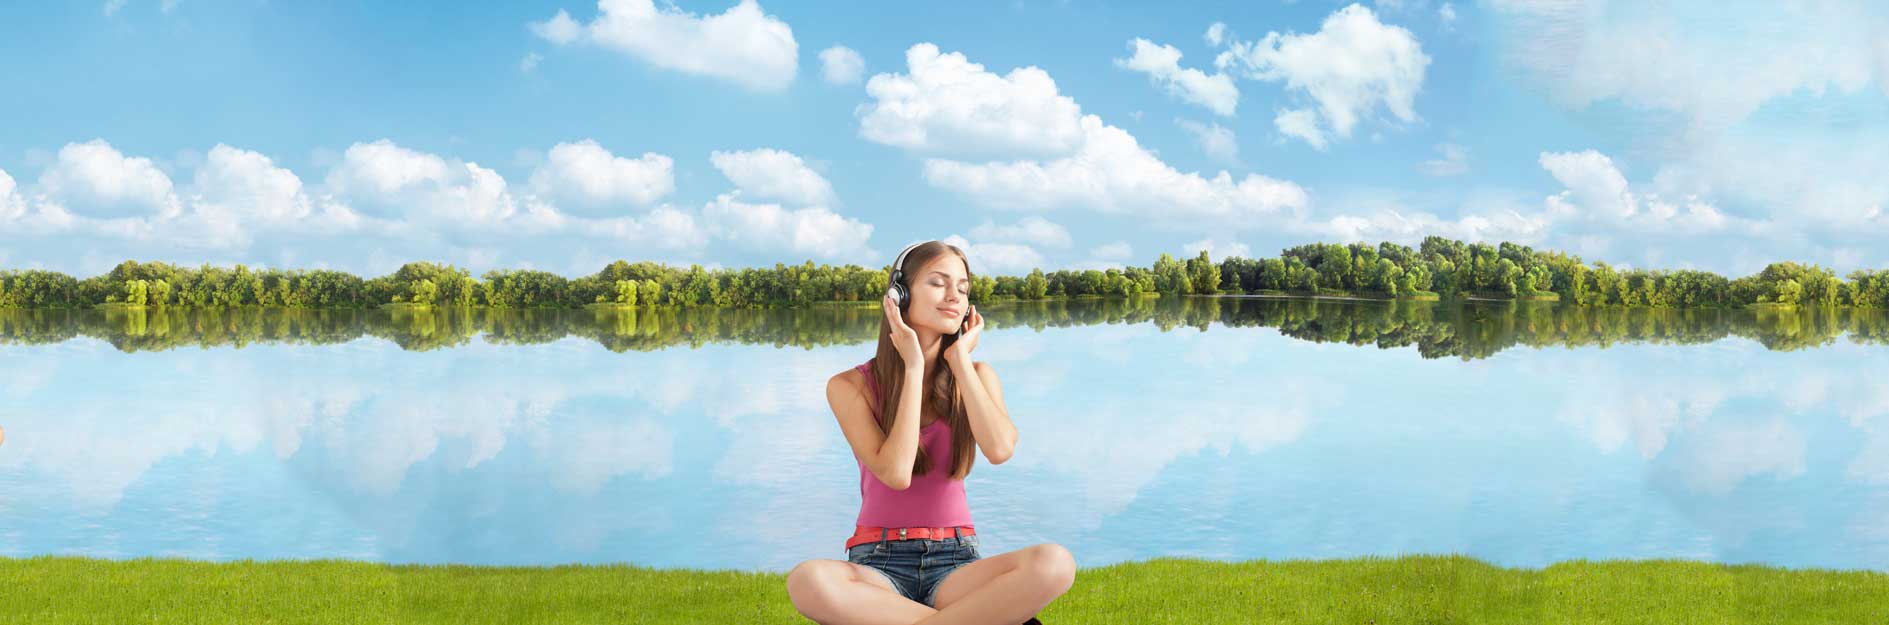 personal development a woman sitting cross legged listening to headphone on grass with a body of water behind her and clouds